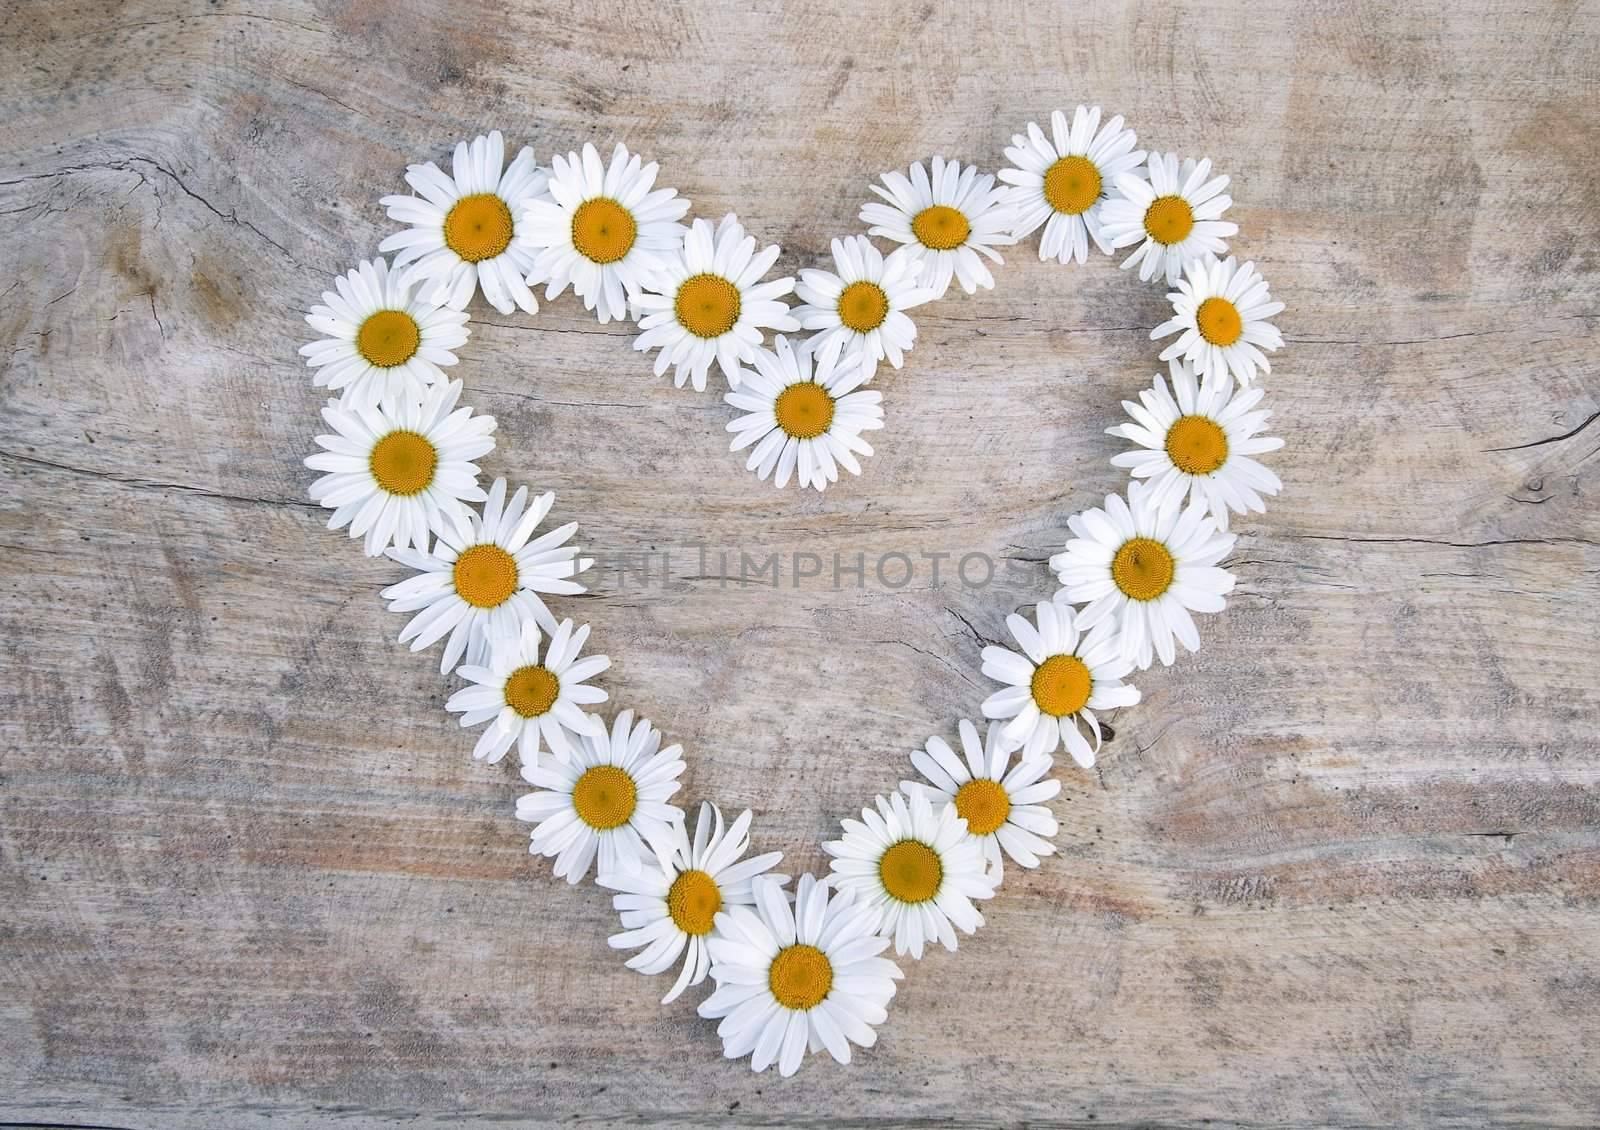 Daisy heart on wooden background